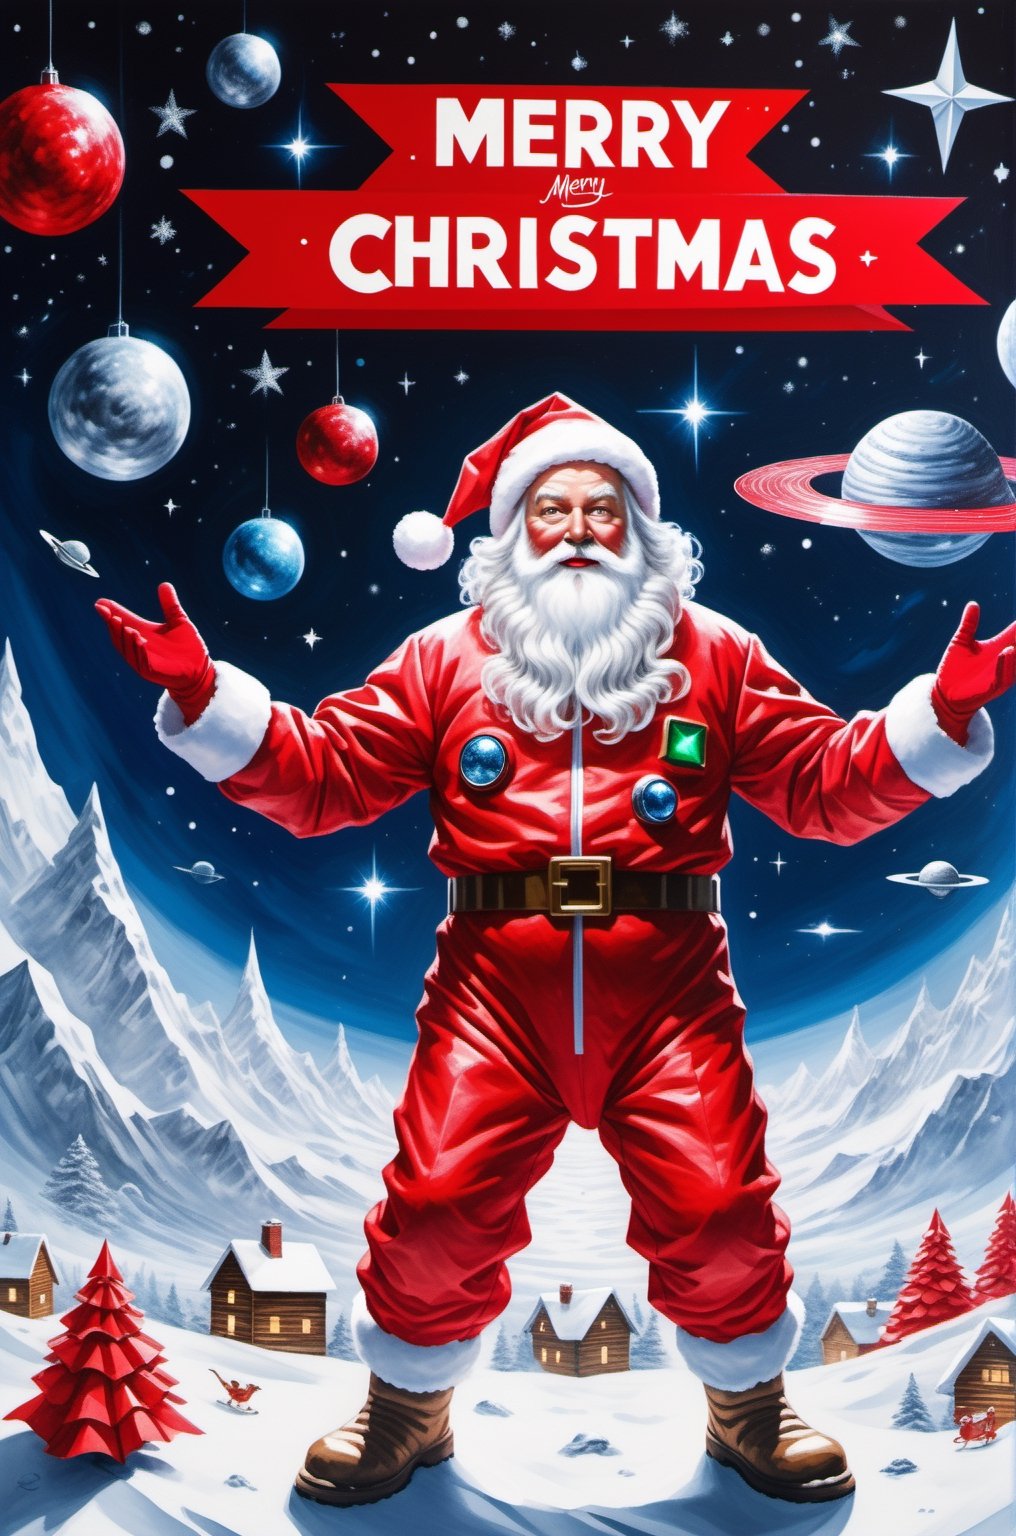 ("Merry Christmas" text logo: 1.3), Origami, dripping paint, ((Santa wearing red space-suits)) venturing into outer space to deliver presents to Aliens, full body portrait, wide scale lens, Text, aw0k magnstyle, ((Masterpiece))), Best Quality, light red painting, starry skies, (White background: 1.1), detailmaster2,Movie Still